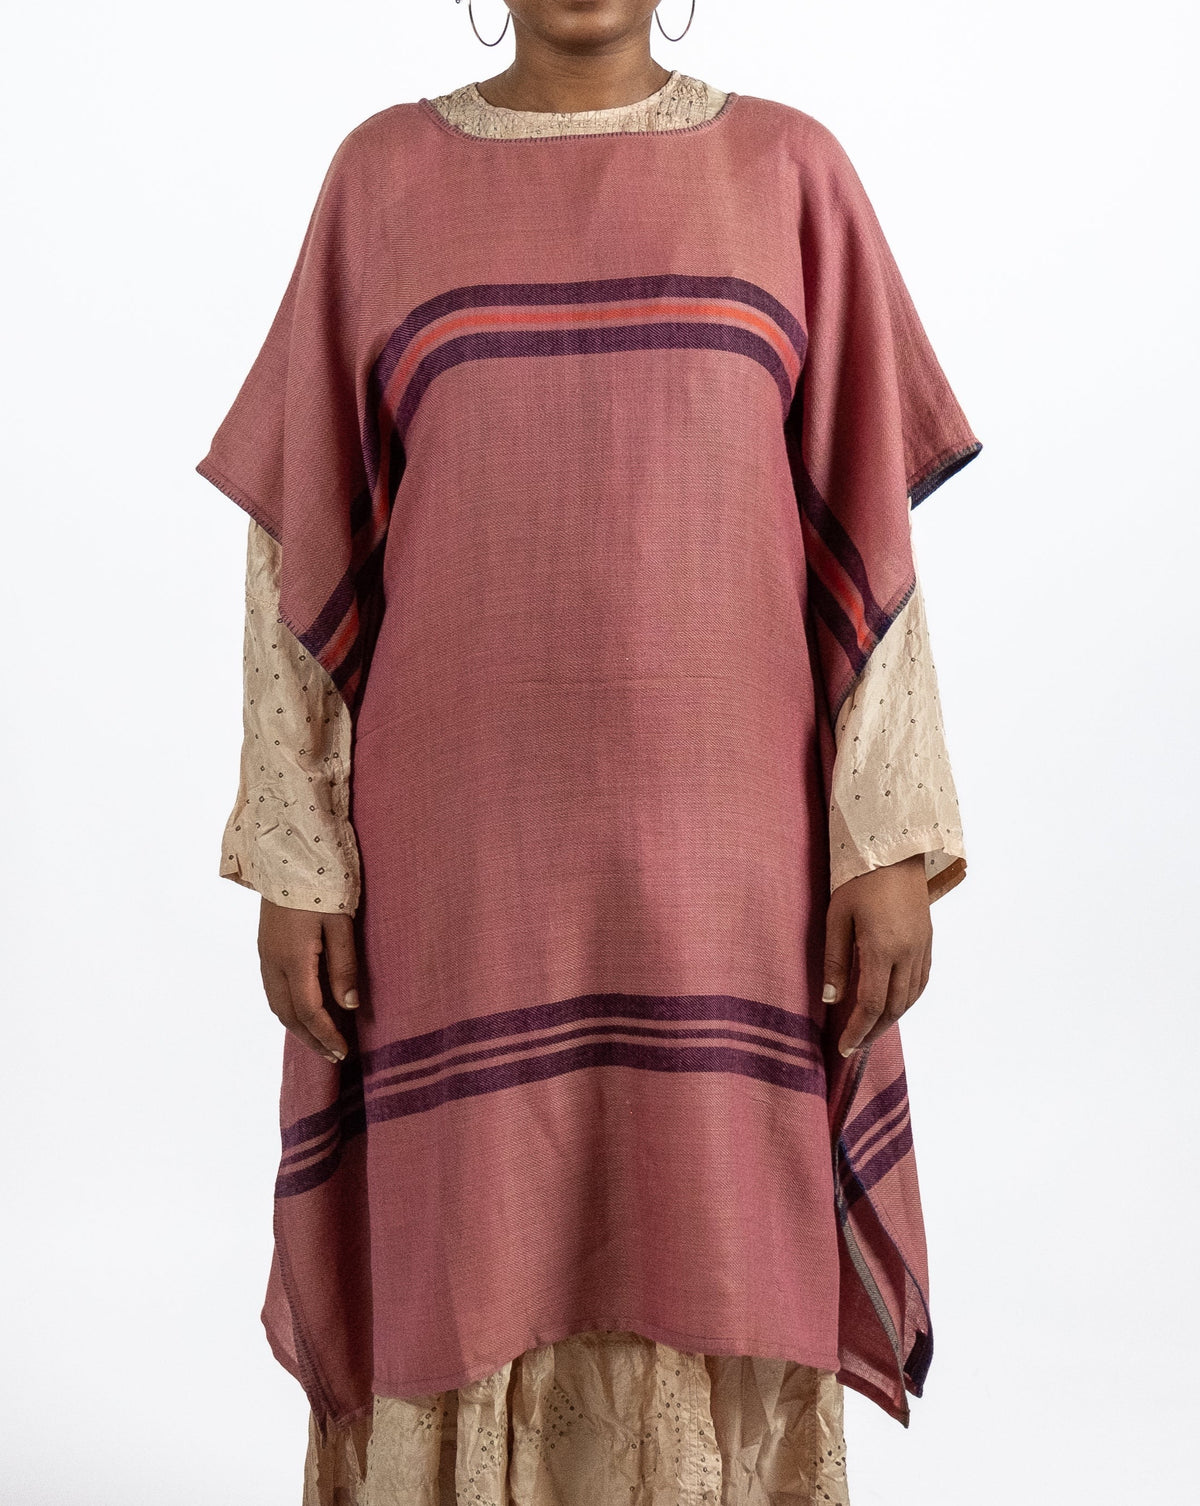 Embroidered Wool Poncho by SADHU